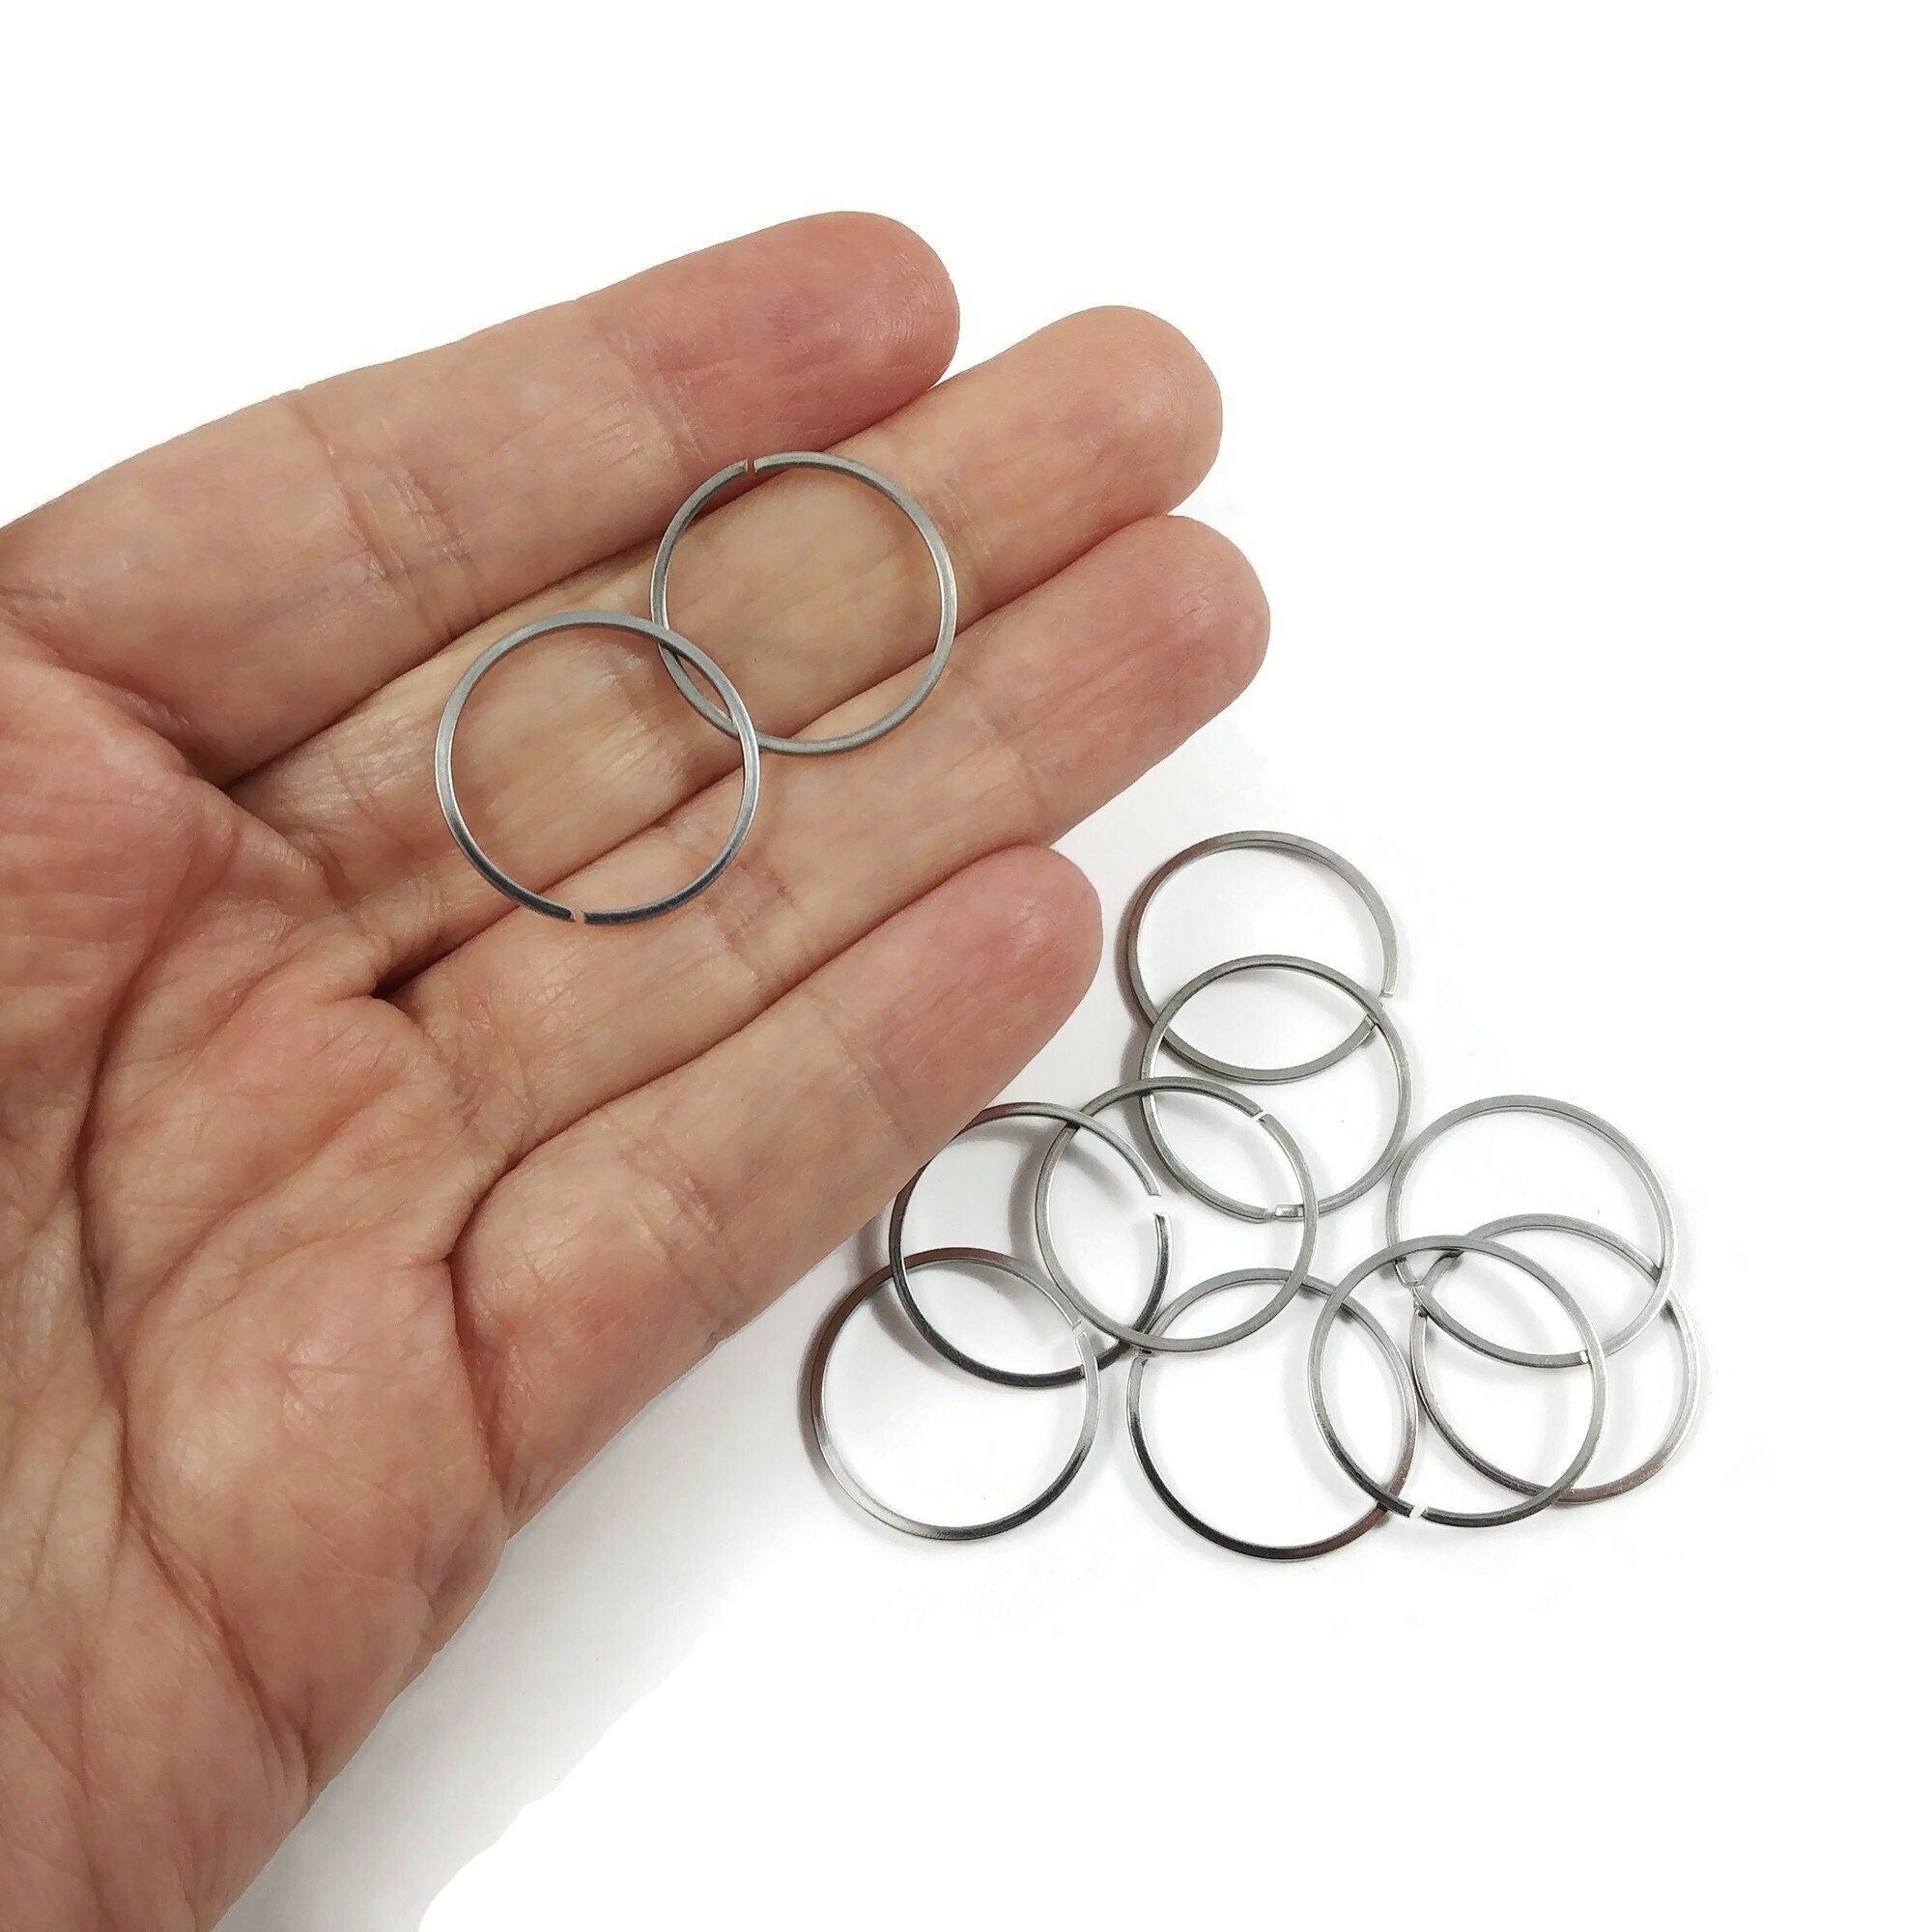 Large Oval Jump Rings, 10pcs Stainless Steel Open Jumprings, 12 Gauge  Hardware for Jewelry Making 